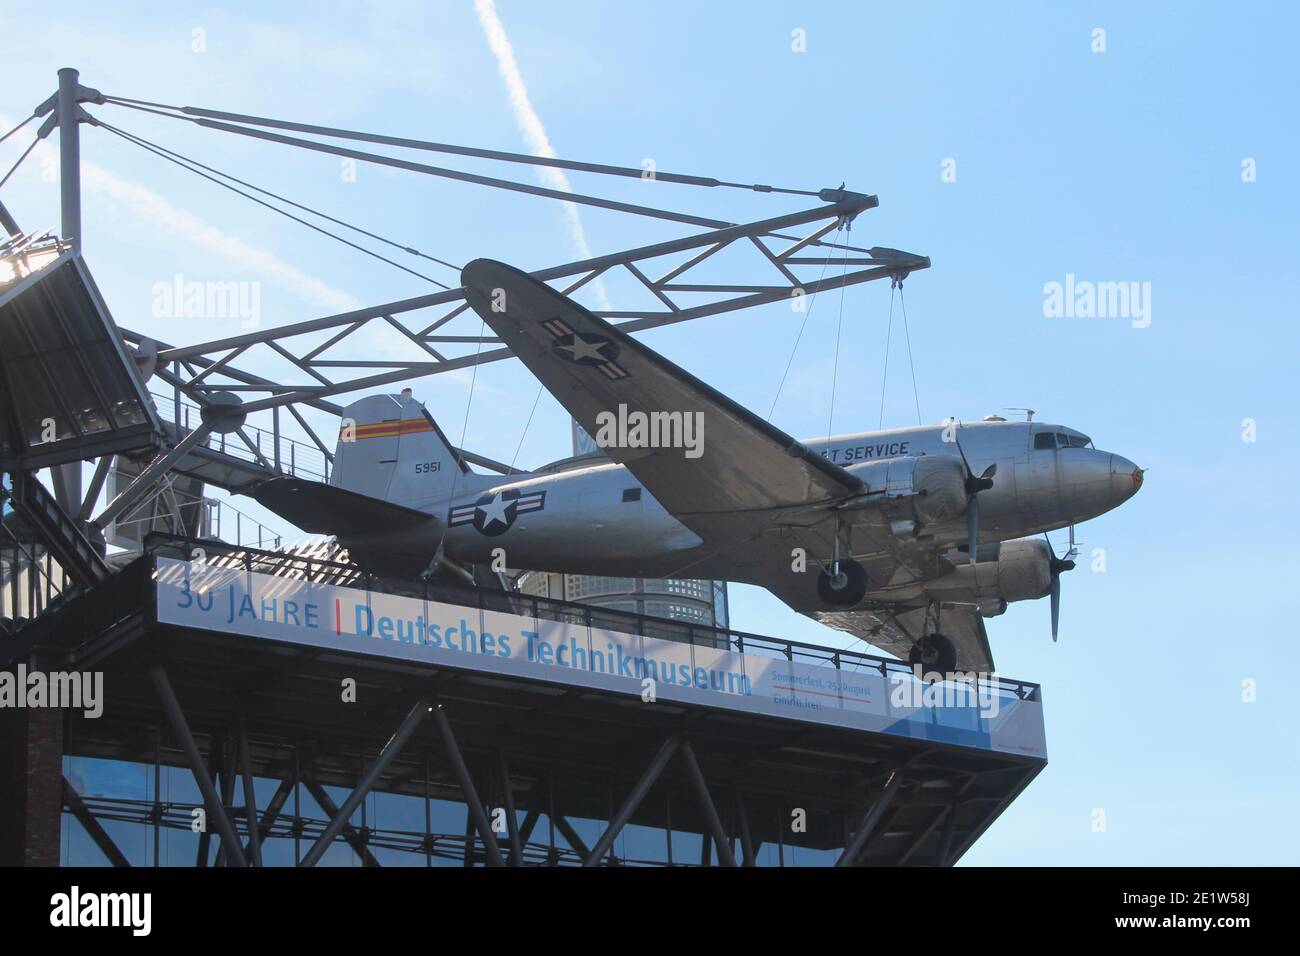 GERMANY, BERLIN, AUGUST 16, 2013: Raisin Bomber at the German Museum of Technology Stock Photo